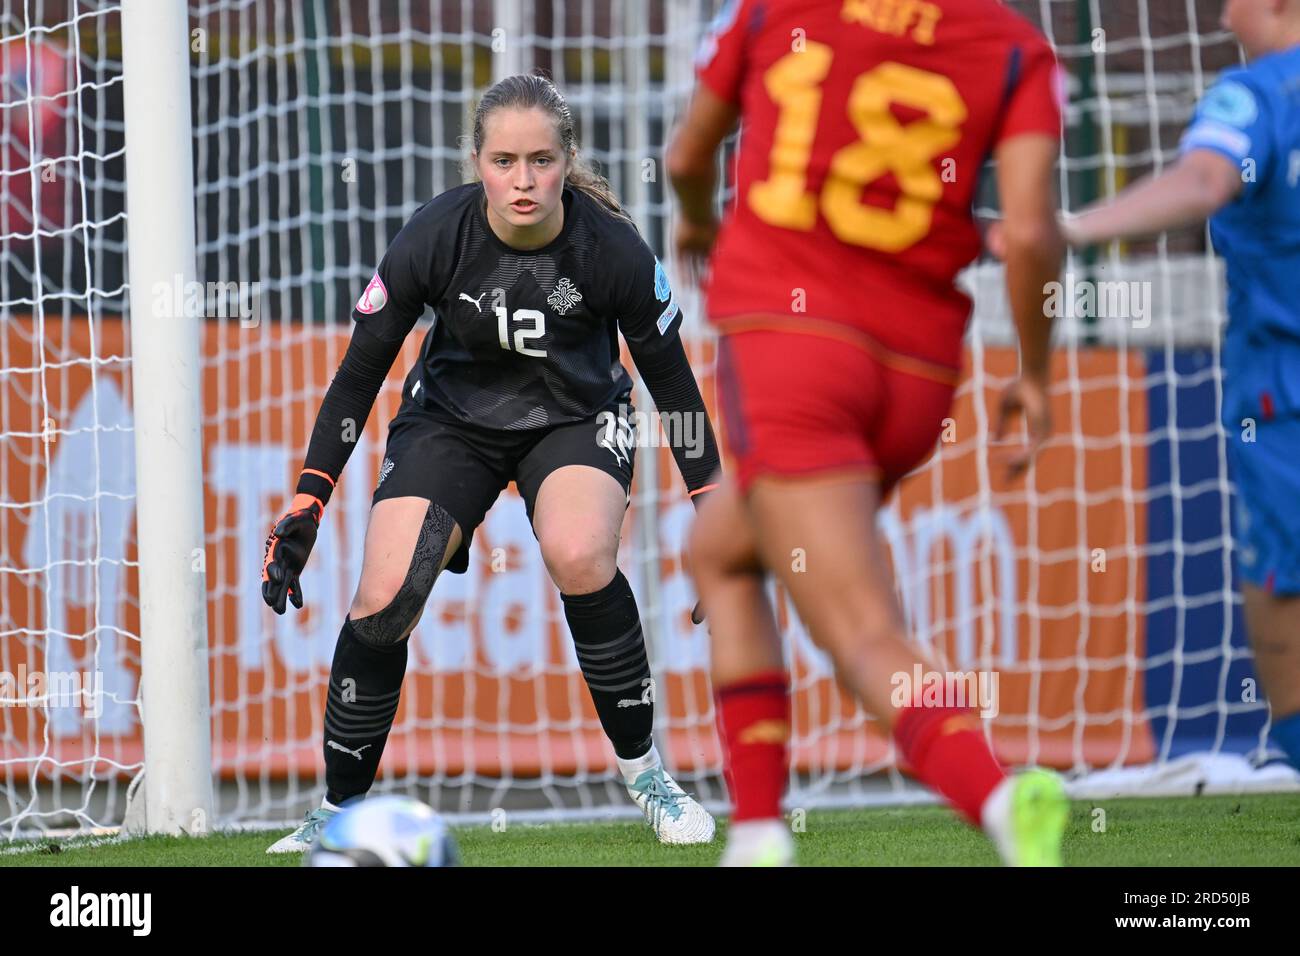 Tubize, Belgium. 18th July, 2023. goalkeeper Fanney Inga Birkisdottir (12) of Iceland pictured in action during a female soccer game between the national women under 19 teams of Iceland and Spain at the UEFA Women's Under-19 EURO Final Tournament on the first matchday in Group B on Tuesday 18 July 2023 in Tubize, Belgium . Credit: sportpix/Alamy Live News Stock Photo